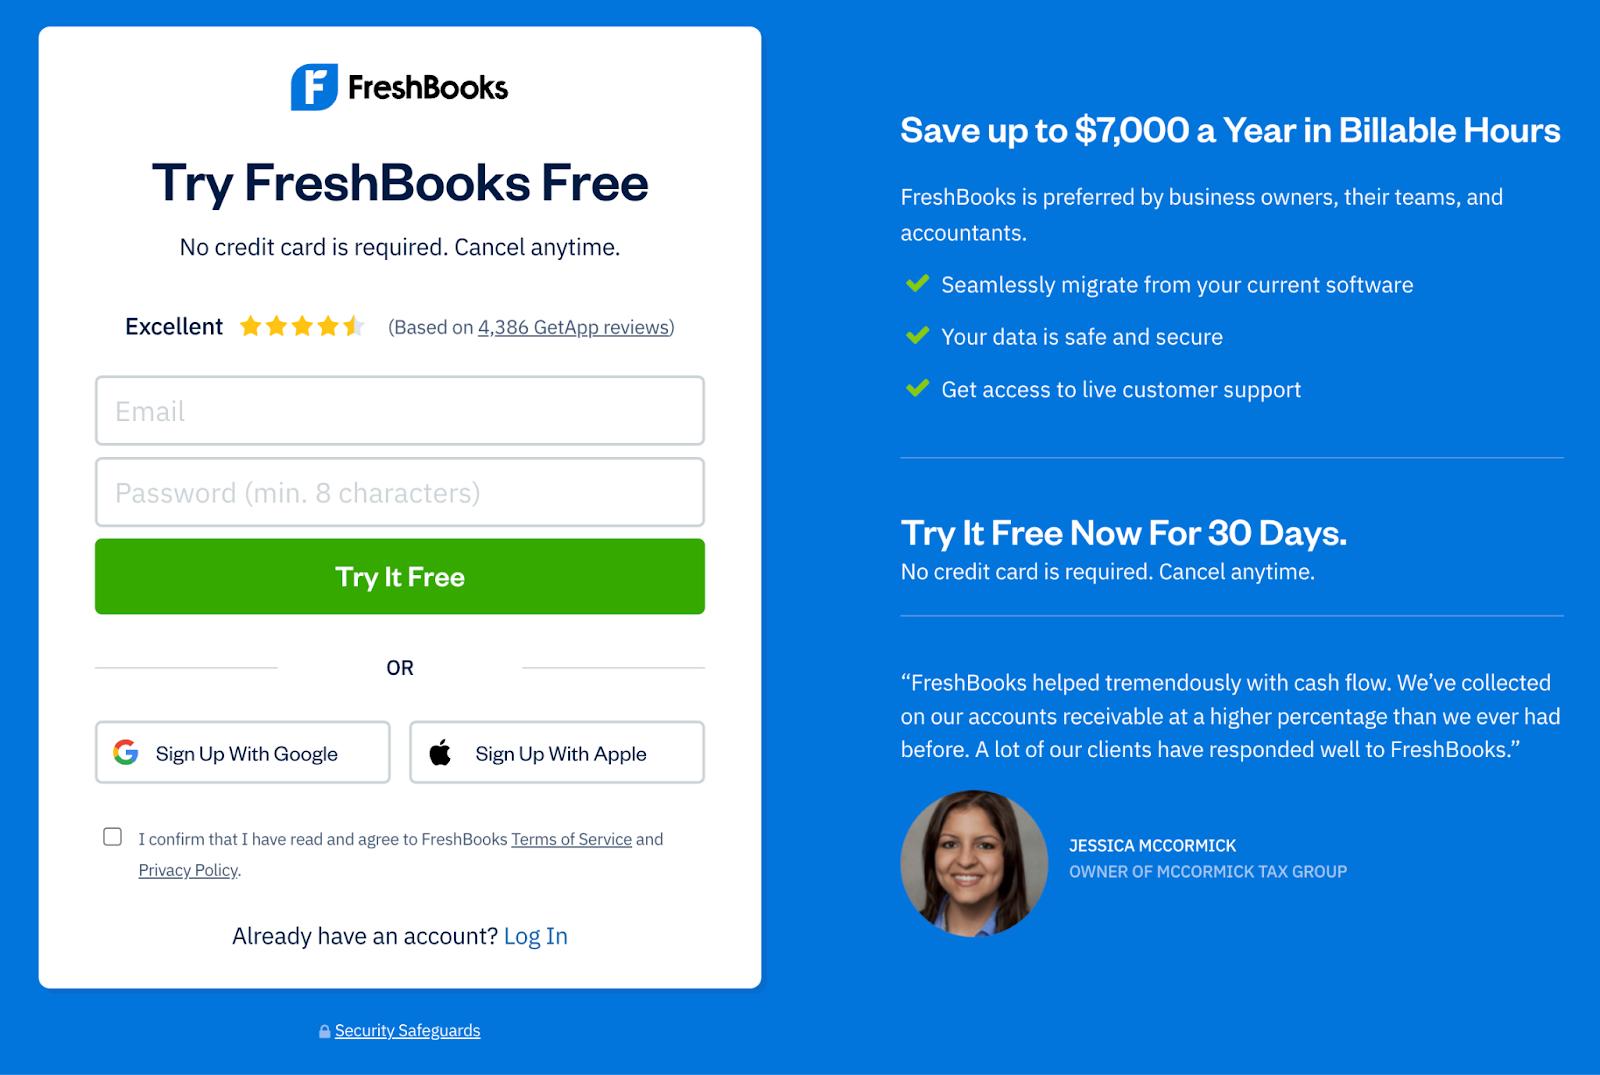 FreshBooks offers an example of a free trial for 30 days